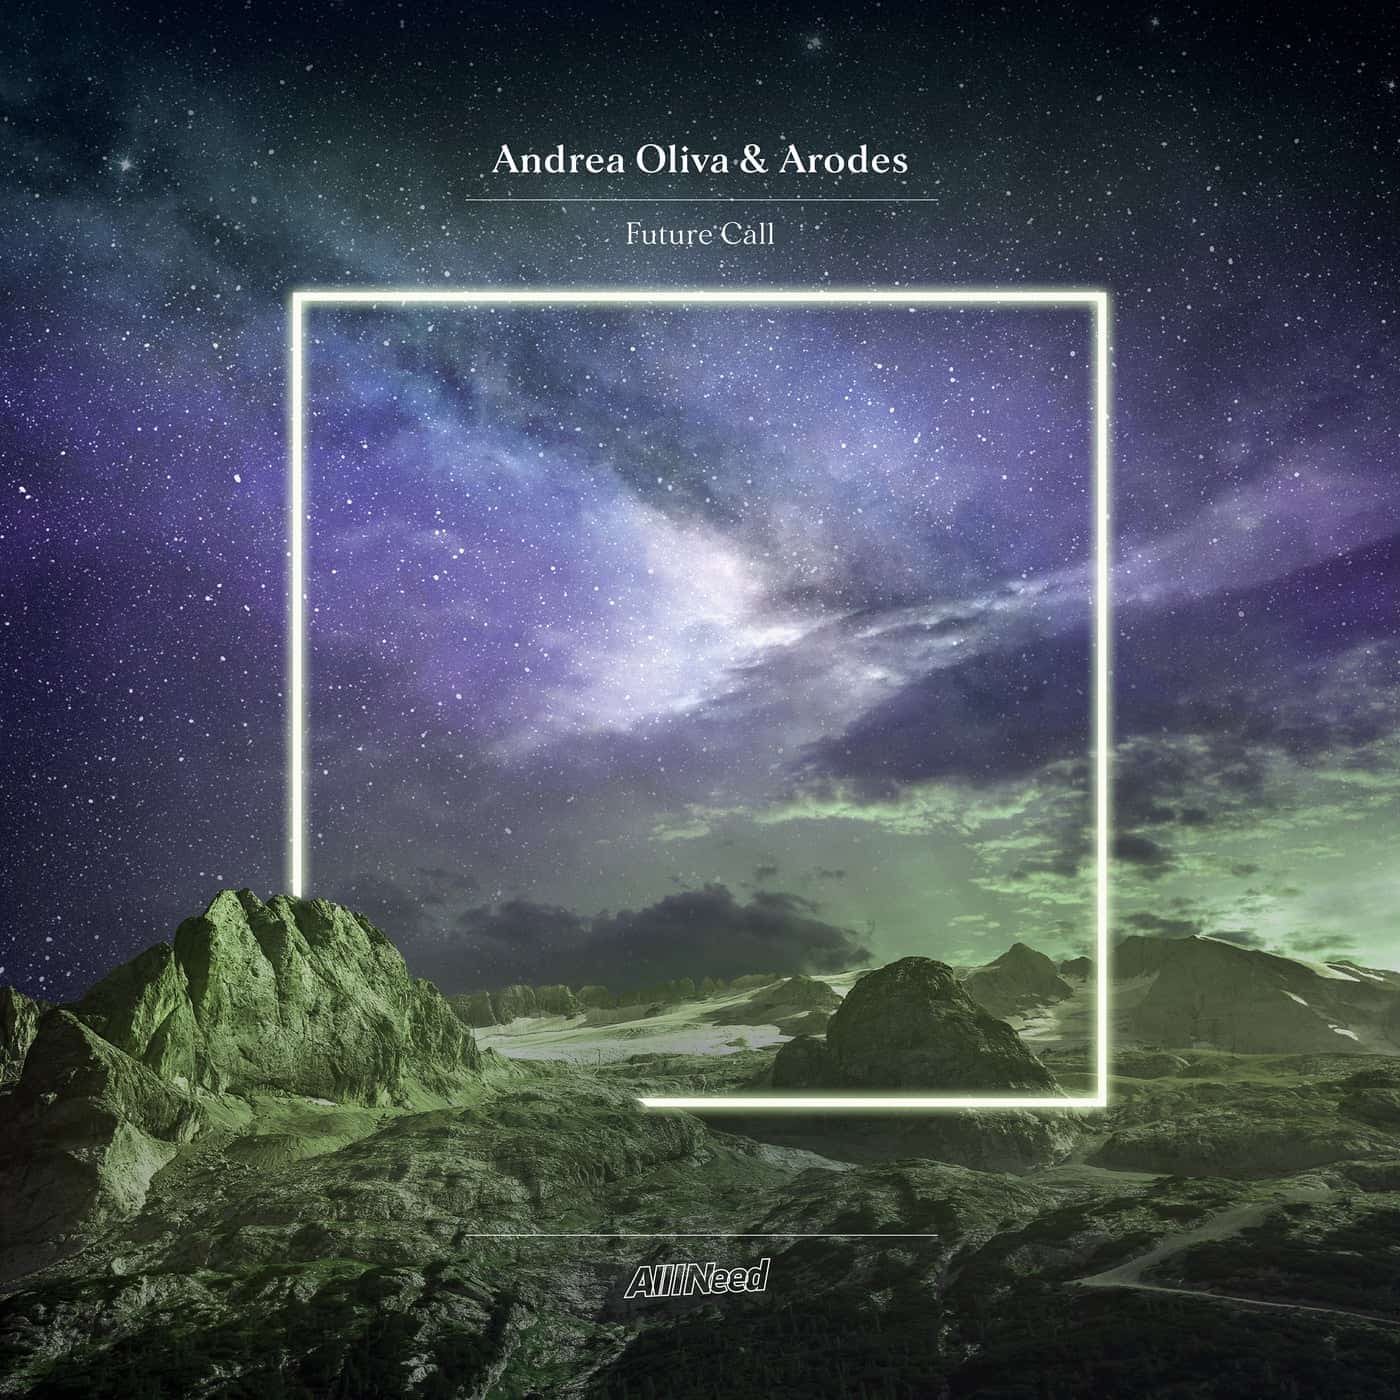 Download Andrea Oliva, Arodes - Future Call on Electrobuzz